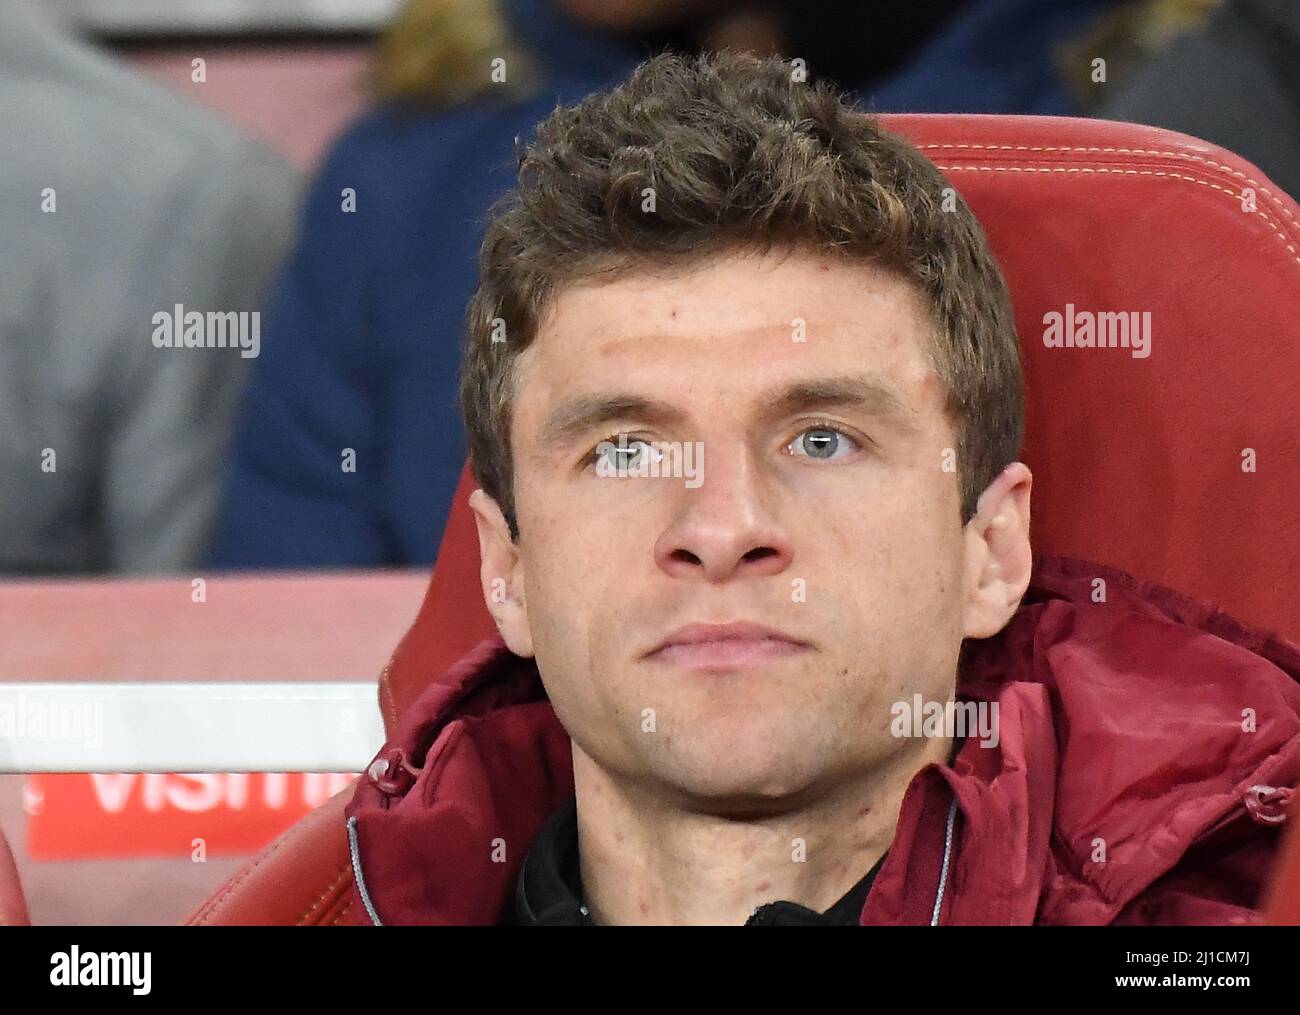 LONDON, ENGLAND - MARCH 7, 2017: Thomas Muller of Bayern pictured prior to the second leg of the UEFA Champions League Round of 16 game between Arsenal FC and Bayern Munchen at Emirates Stadium. Copyright: Cosmin Iftode/Picstaff Stock Photo